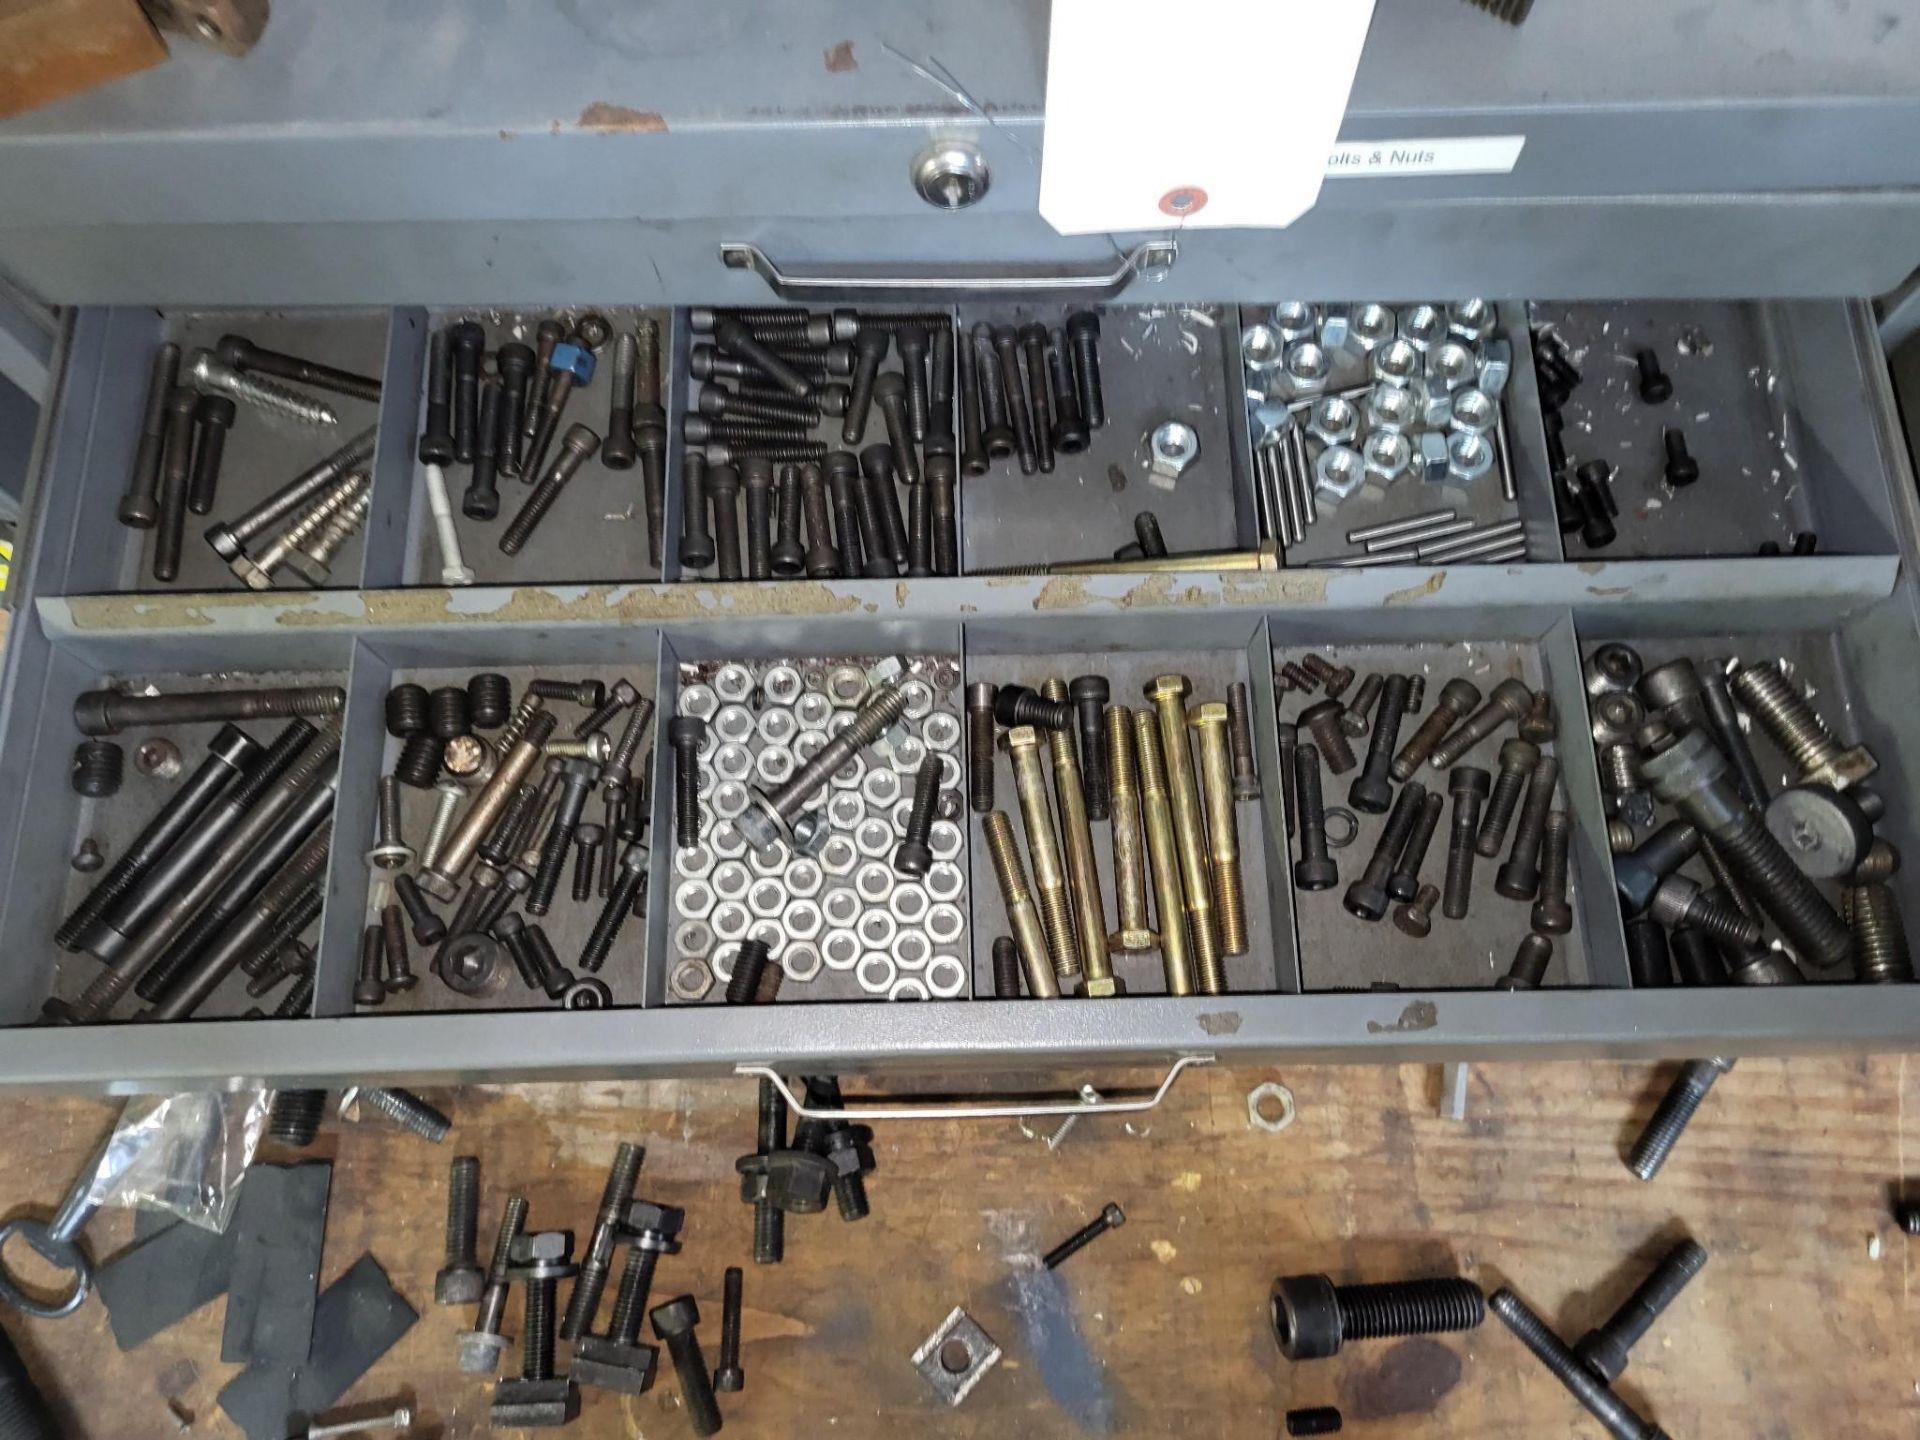 LARGE LOT OF MILLING TOOLS, TAPS, CARBIDE INSERTS, SETUP HARDWARE AND HAND TOOLS - Image 18 of 24